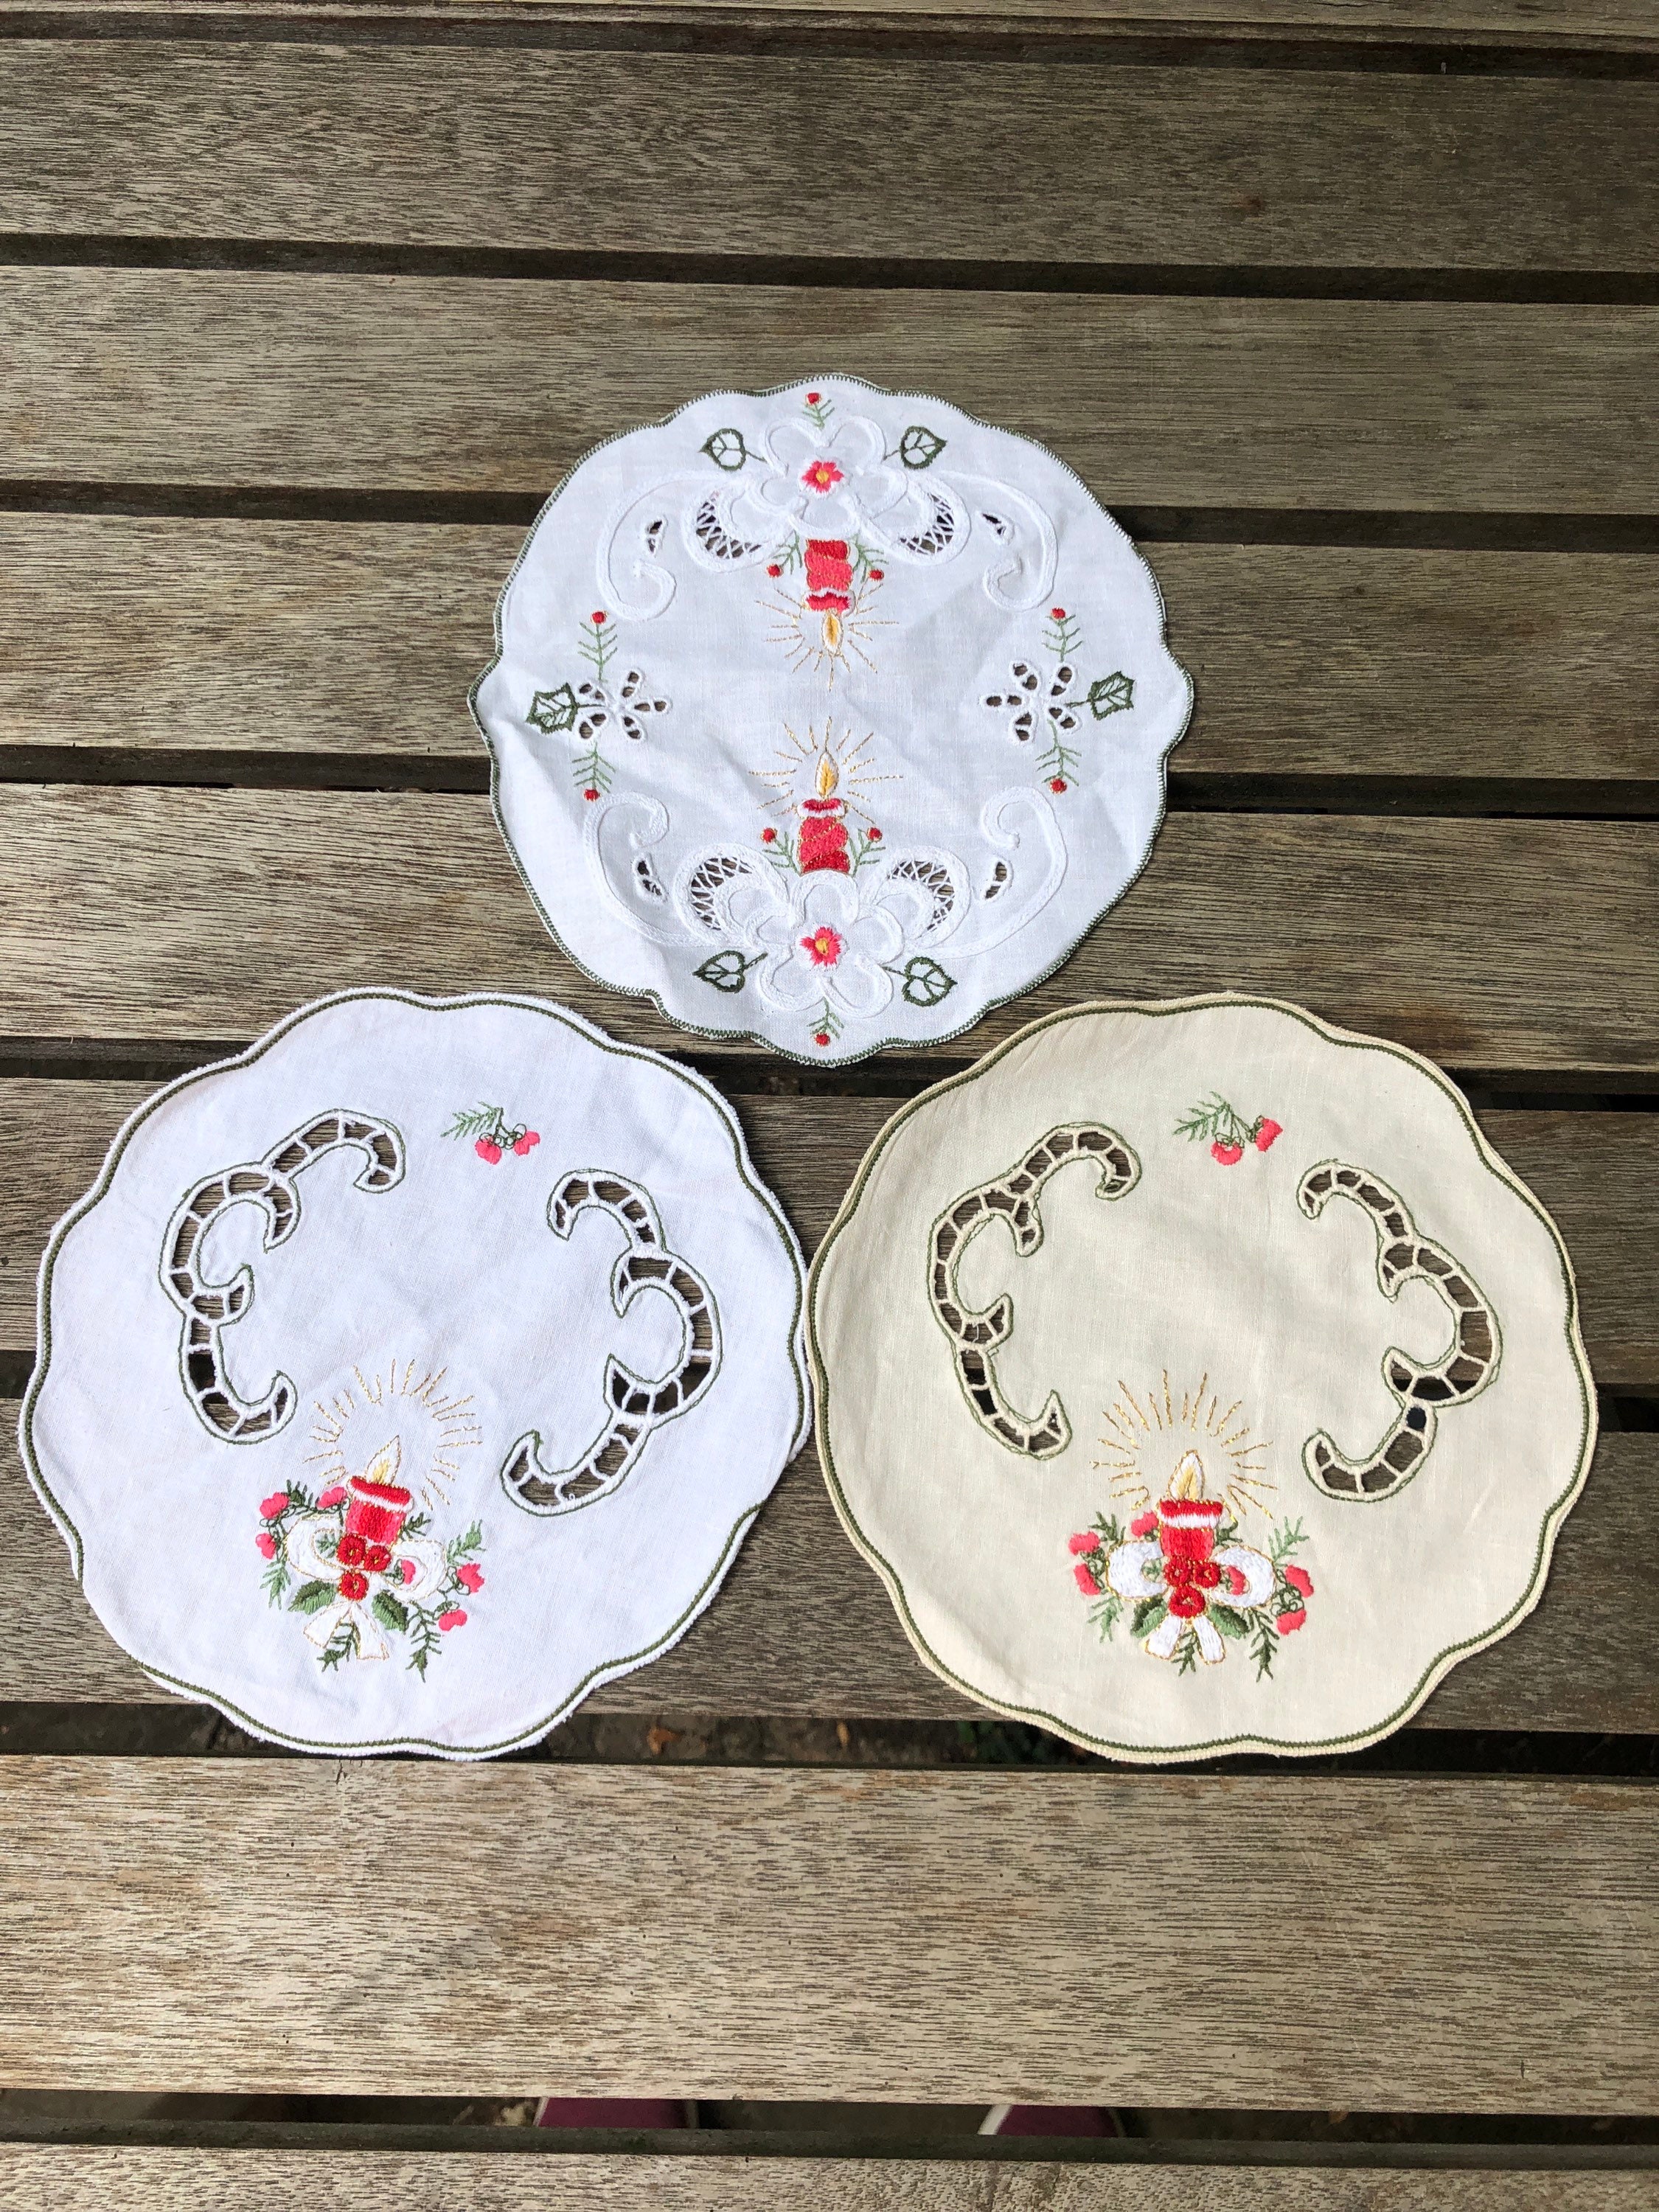 Kwestie bevolking methaan Vintage Embroidered Tablecloth Round Small Table Mats - Etsy